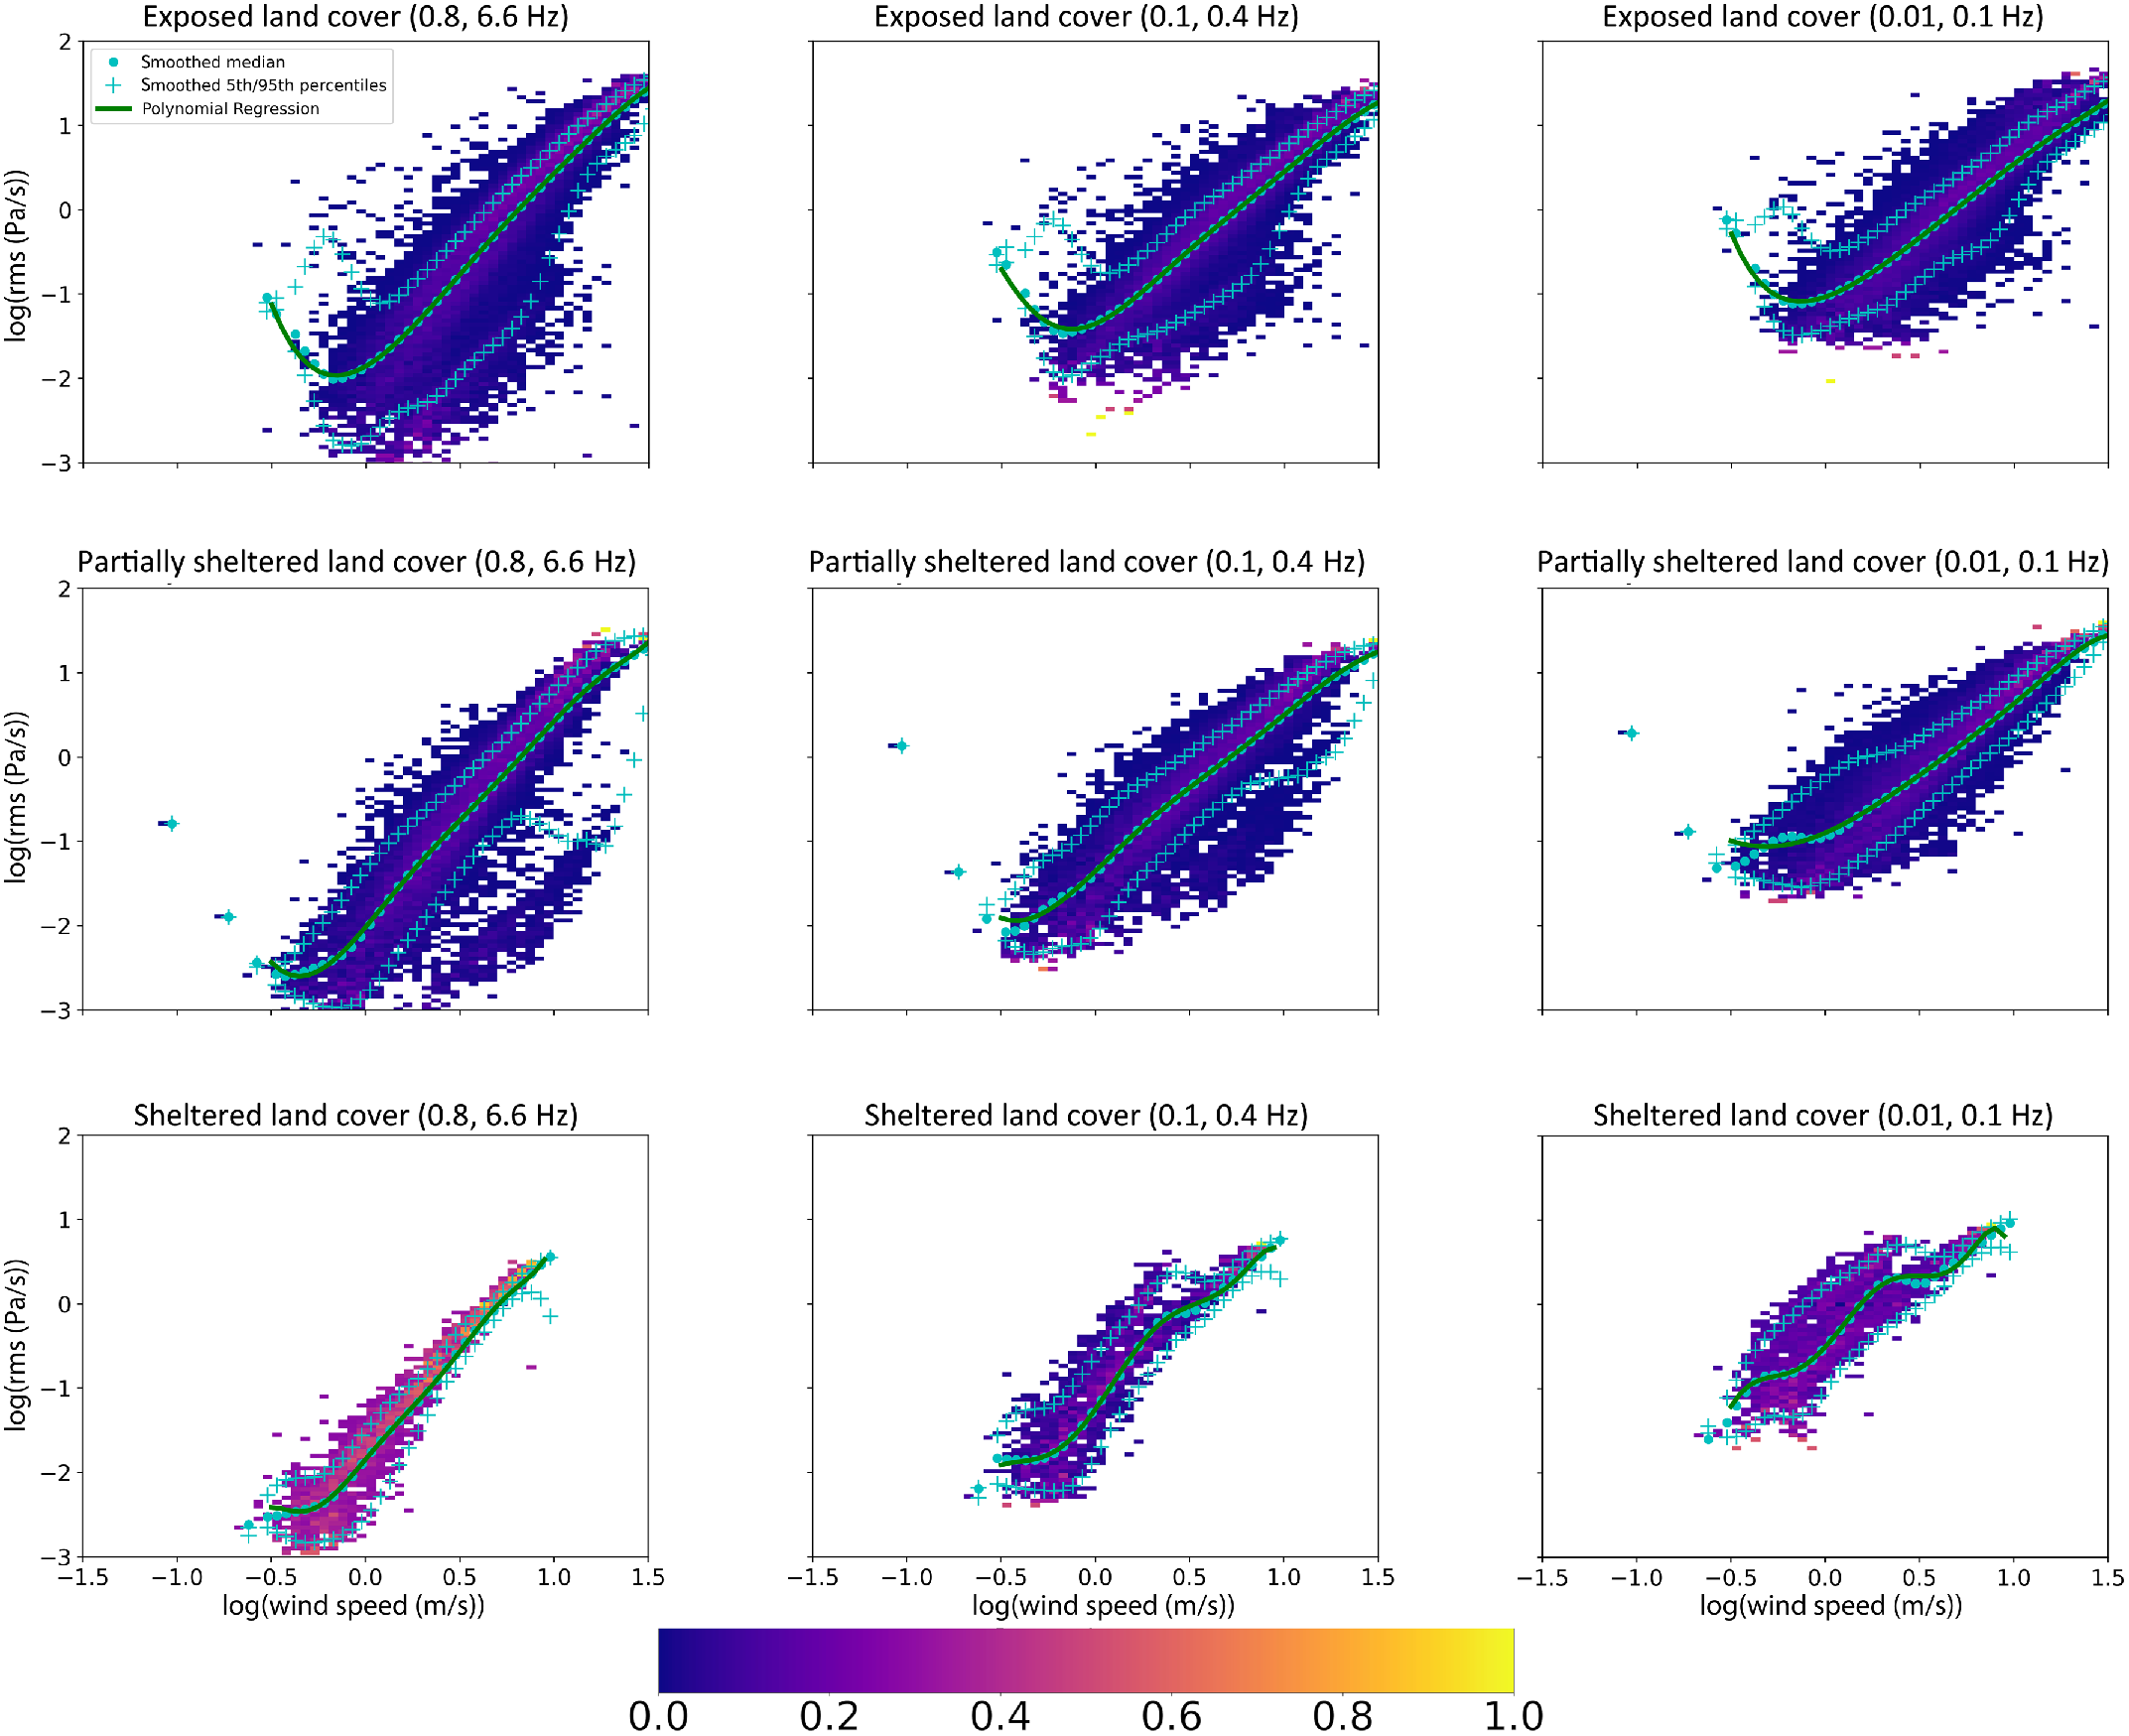 Two‐dimensional histograms showing relationships between observed wind speed and rms noise for 2020. The bins have been normalized to indicate the density of observations in each bin, with warmer colors indicating more observations. The top row is sites in the exposed land cover category, middle row is partially exposed, and bottom row is sheltered sites. The columns show the three passbands: [0.01, 0.1], [0.1, 0.4], and [0.8, 6.6] Hz. The smoothed median for each dataset is shown by cyan circles, the 5th a